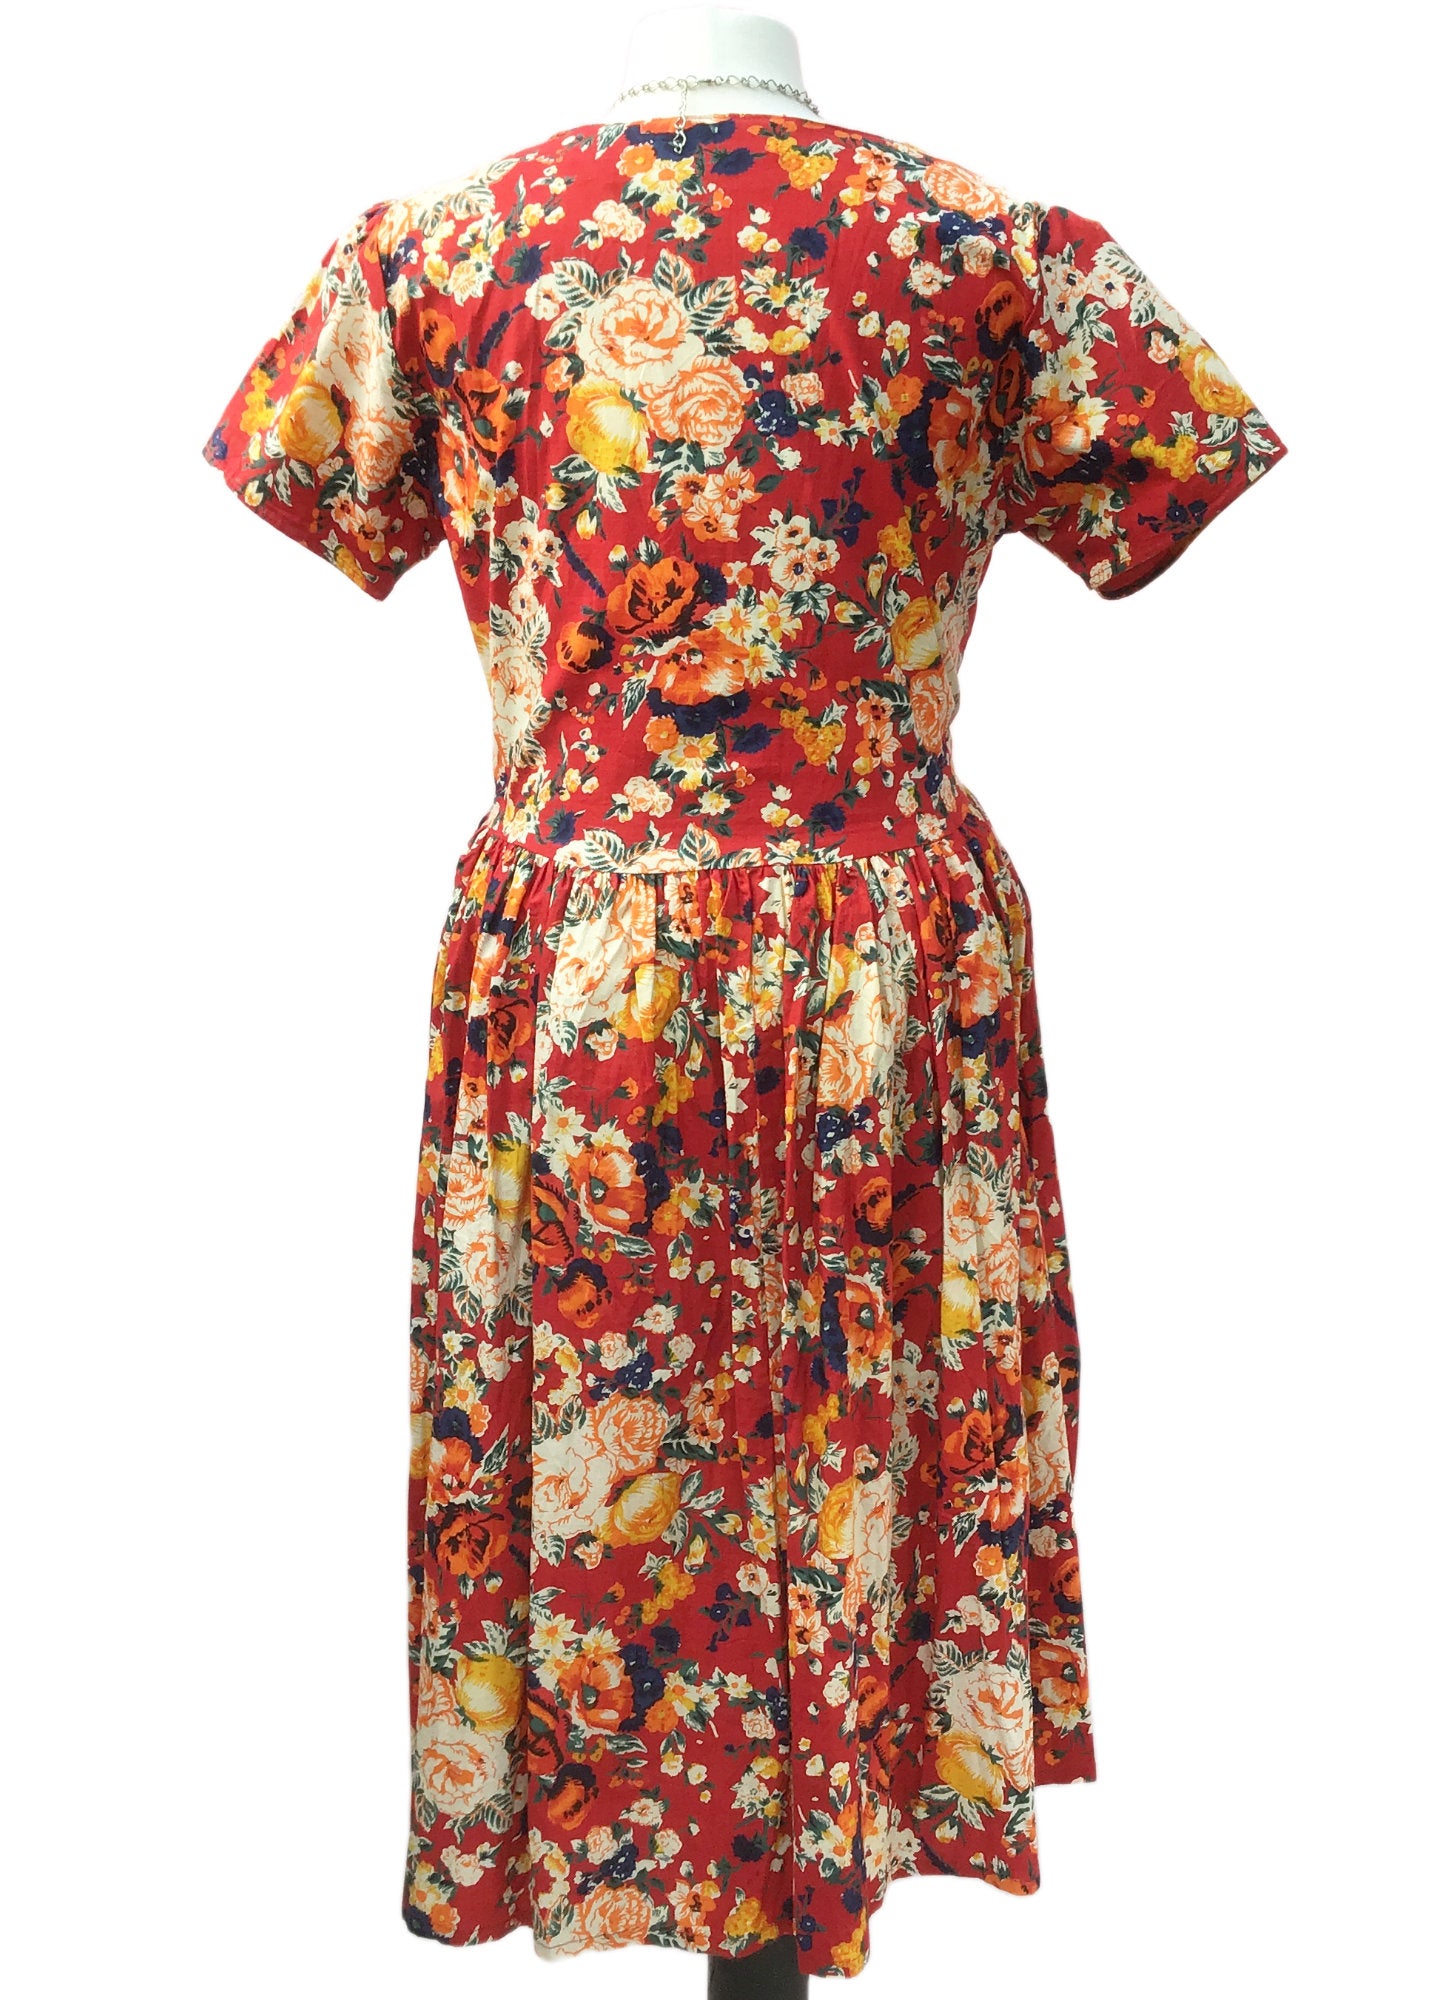 Red Roses Floral Print Retro Summer Dress with Waist Lacing • Size 16